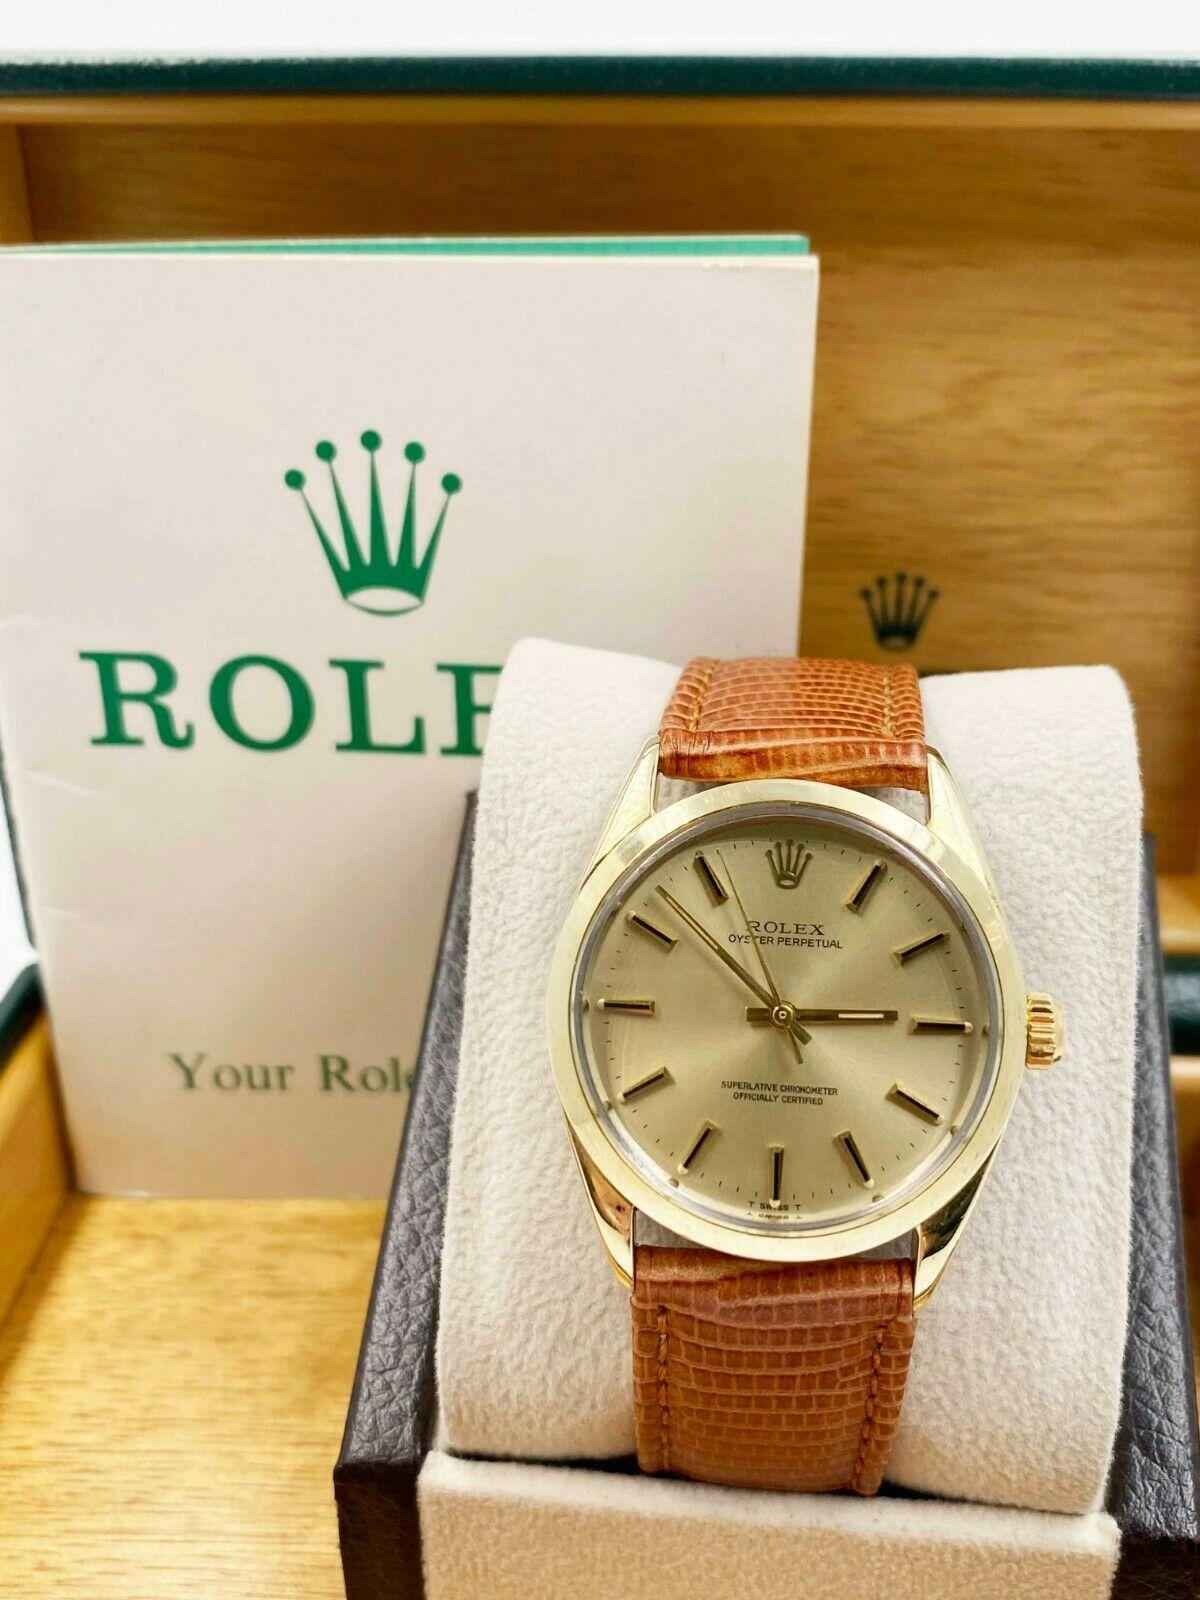 Style Number: 1024

 

Serial: 2197***


Year: 1970

 

Model: Oyster Perpetual

 

Case Material:  14K Yellow Gold Capped

 

Band: Custom Leather Band 

 

Bezel:  14K Yellow Gold Capped

 

Dial: Champagne

 

Face: Acrylic 

 

Case Size: 34mm

